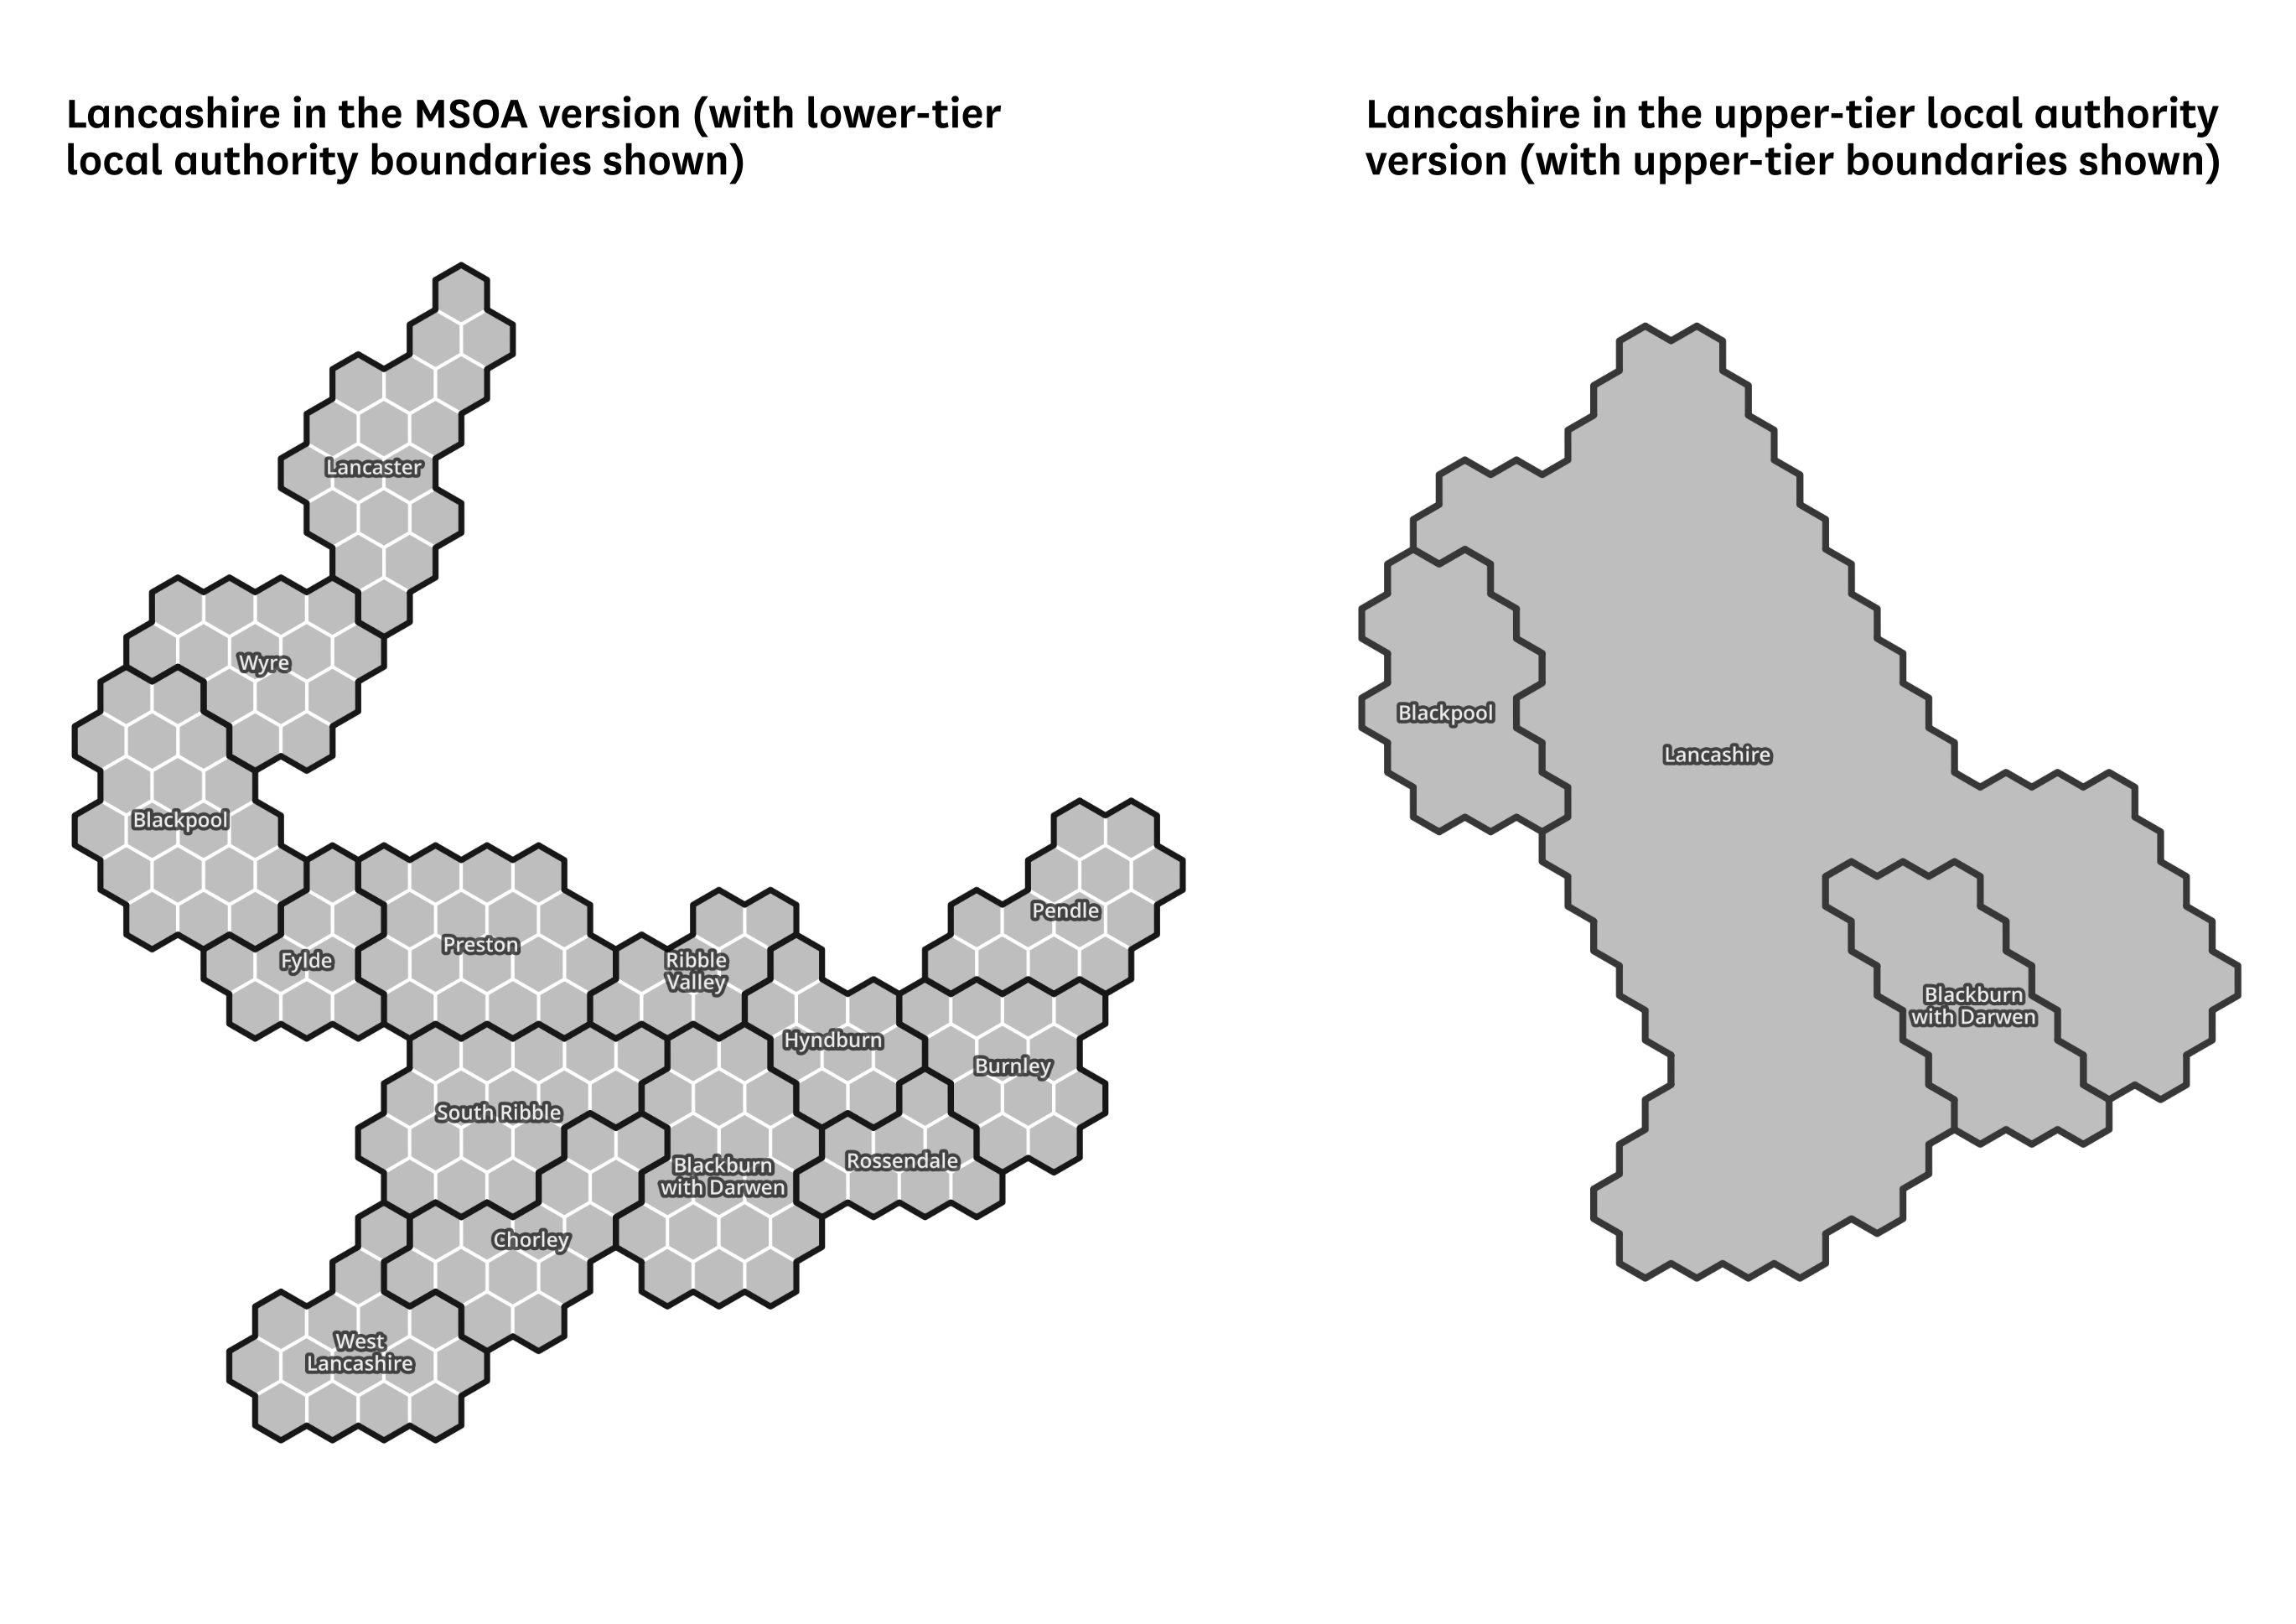 Comparing the shape of Lancashire in the MSOA and upper-tier local authority versions.